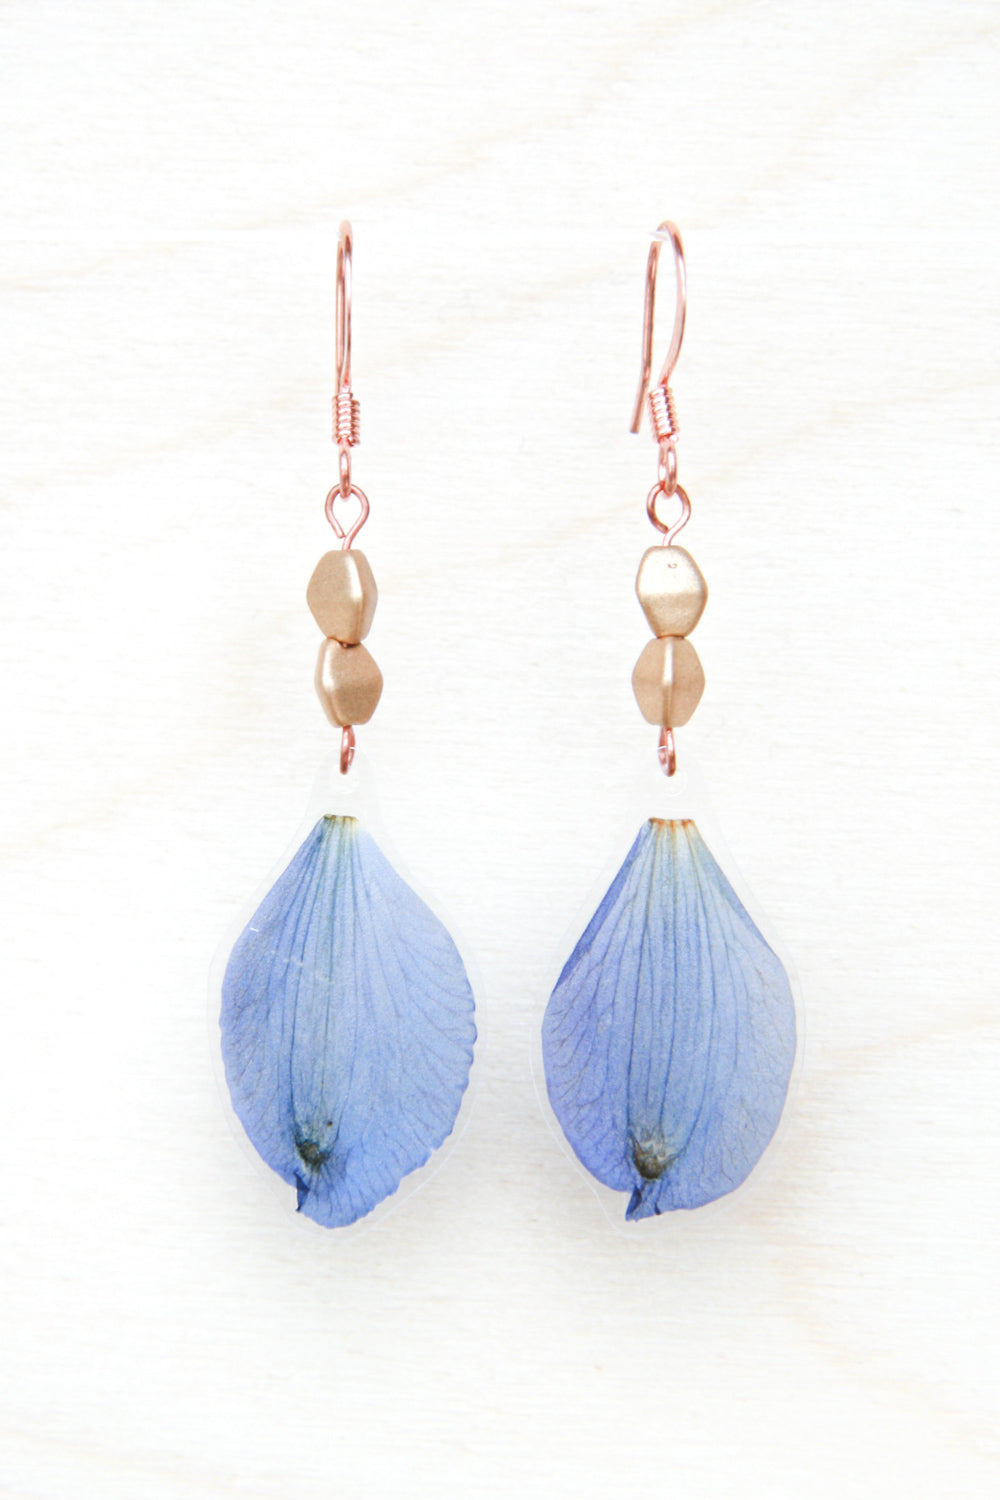 Delphinium Pressed Petal Earrings with Flax Metallic Glass Beads